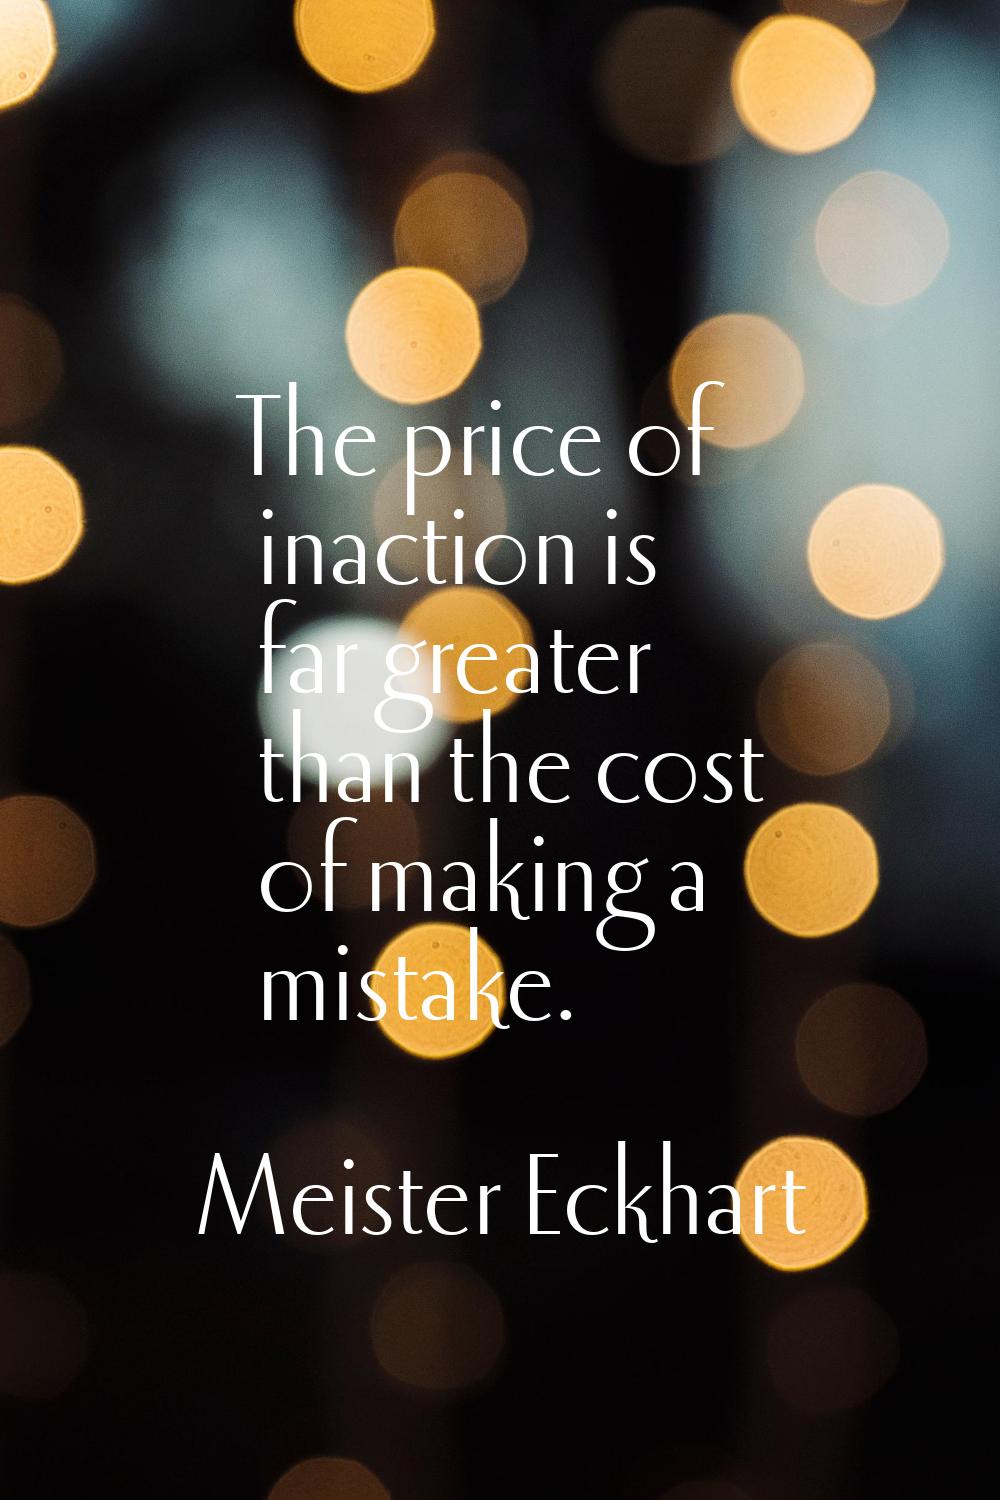 The price of inaction is far greater than the cost of making a mistake.